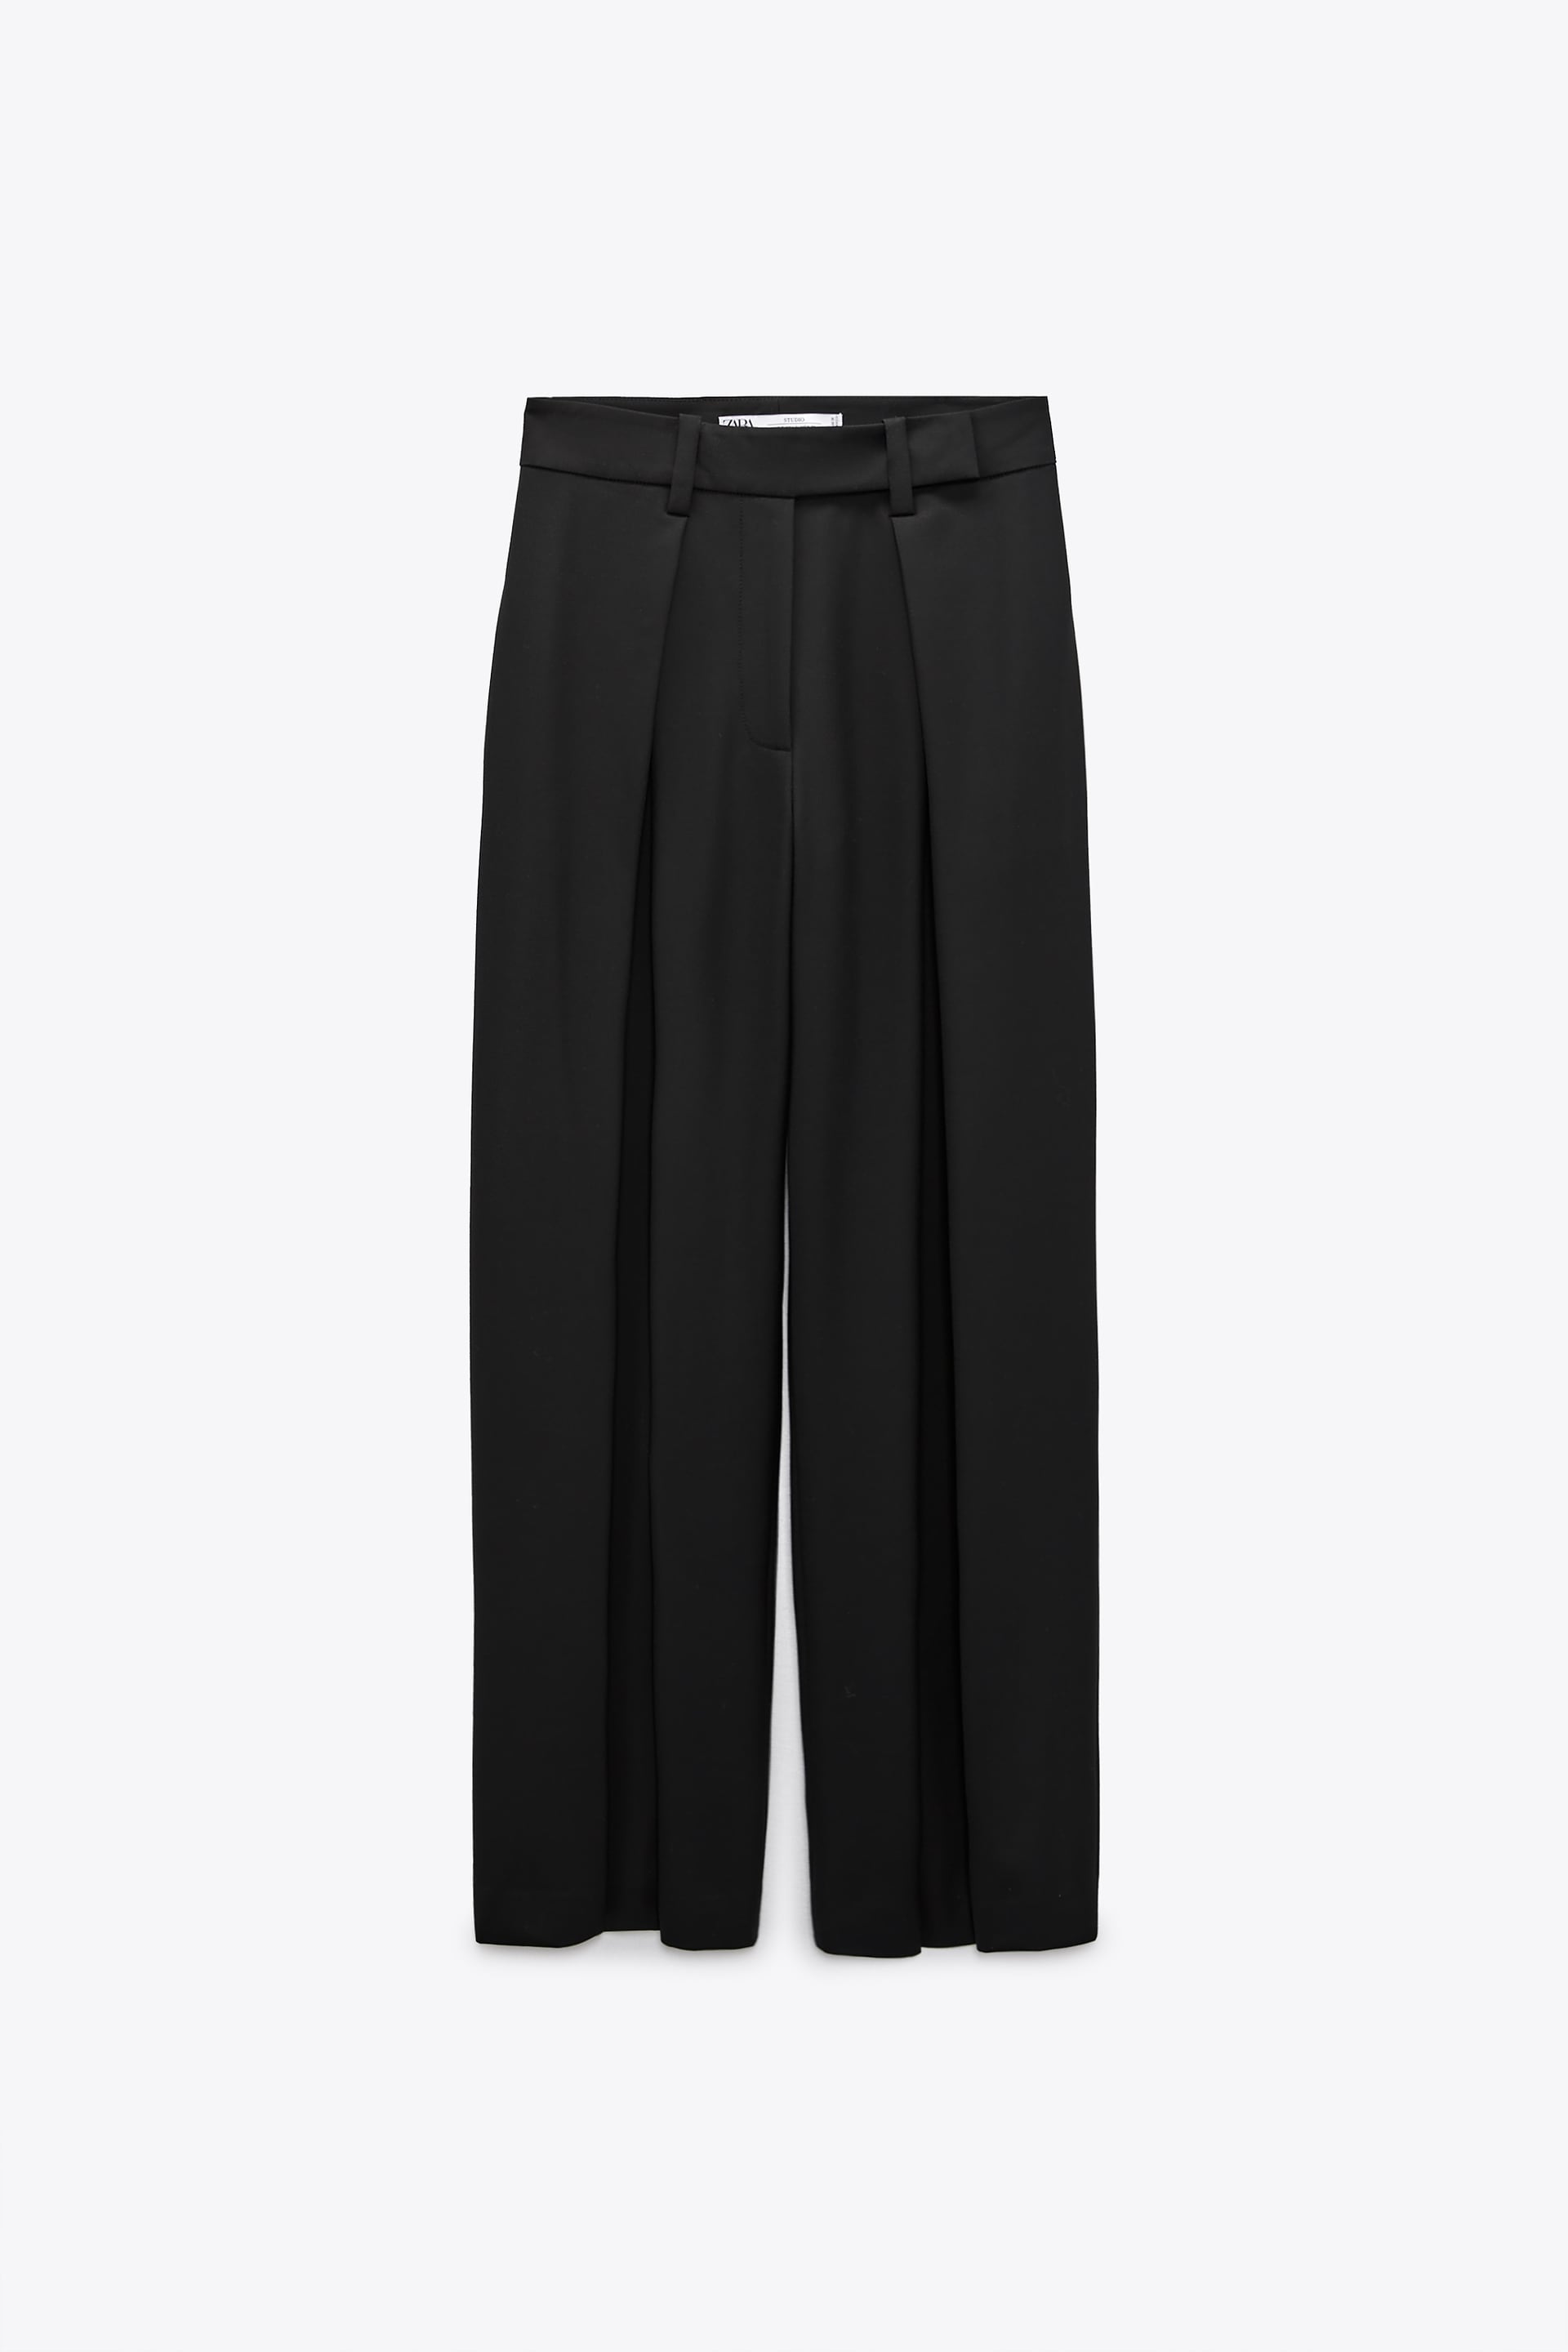 OVERSIZE TROUSERS WITH DARTS - LIMITED EDITION